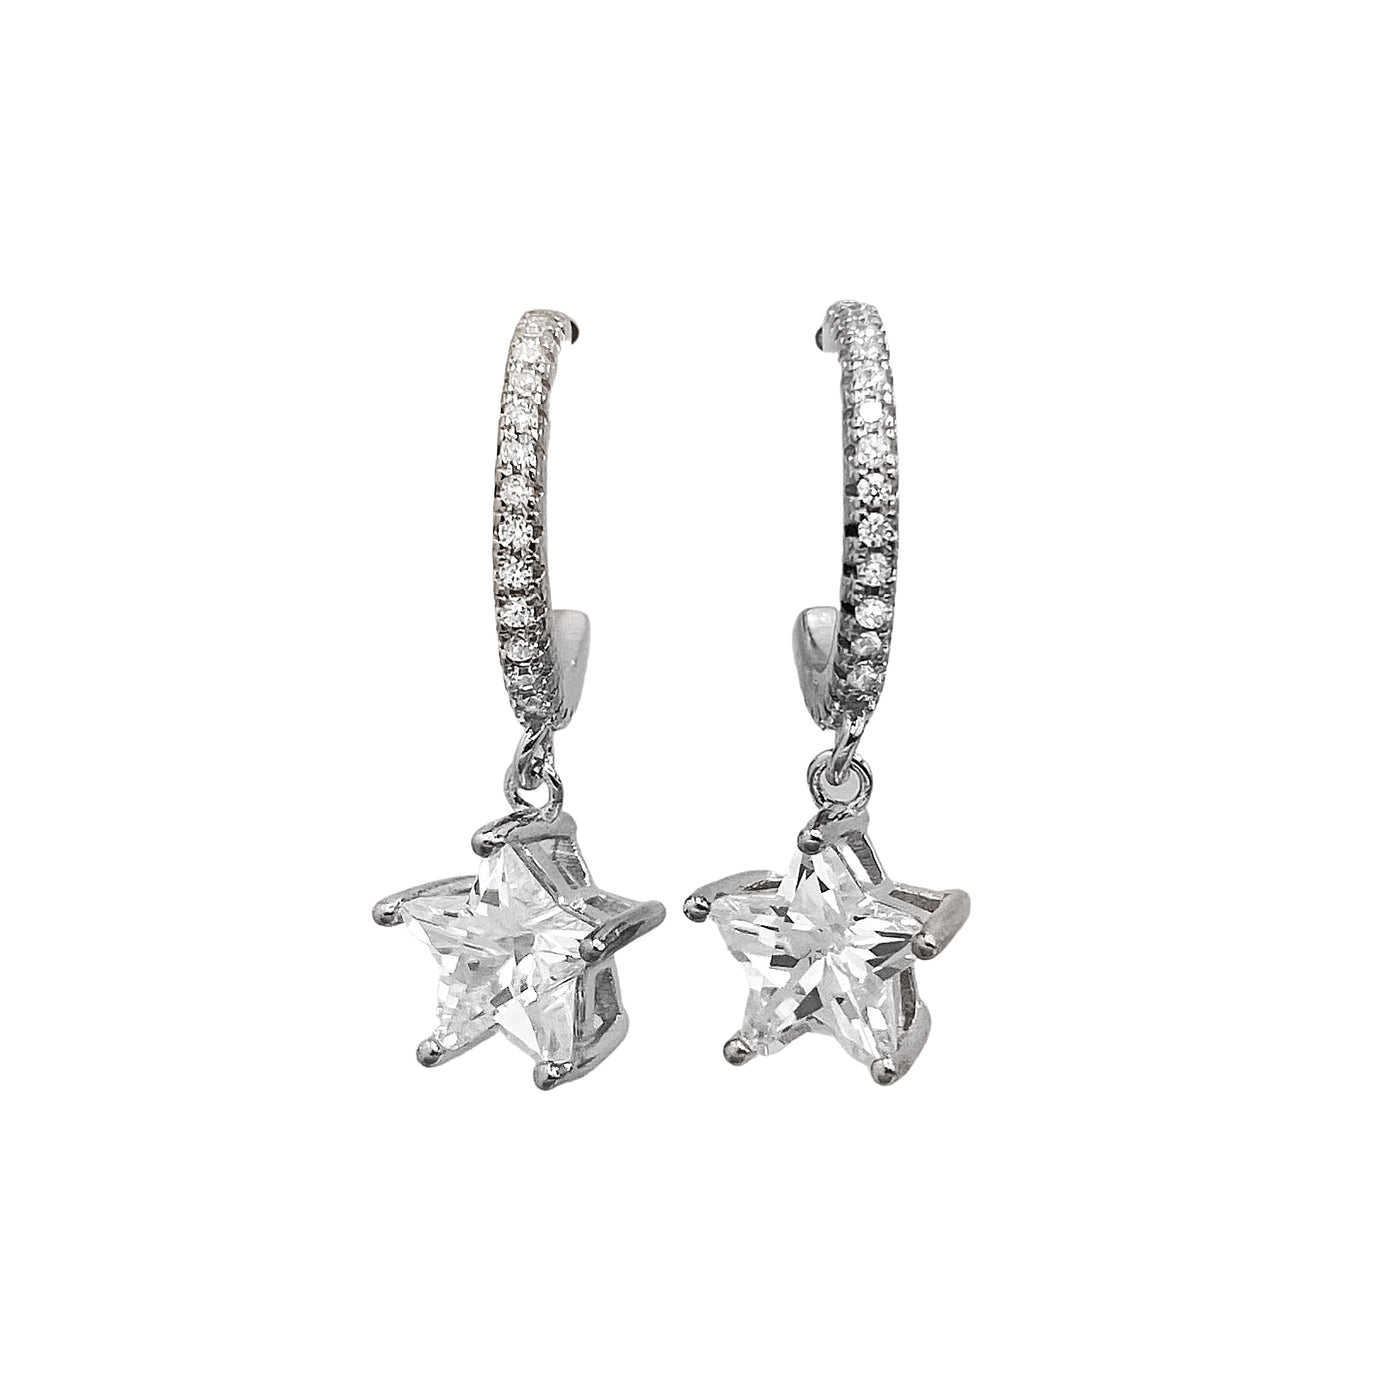 Silver earrings with star charm - 7 mm - rhodium